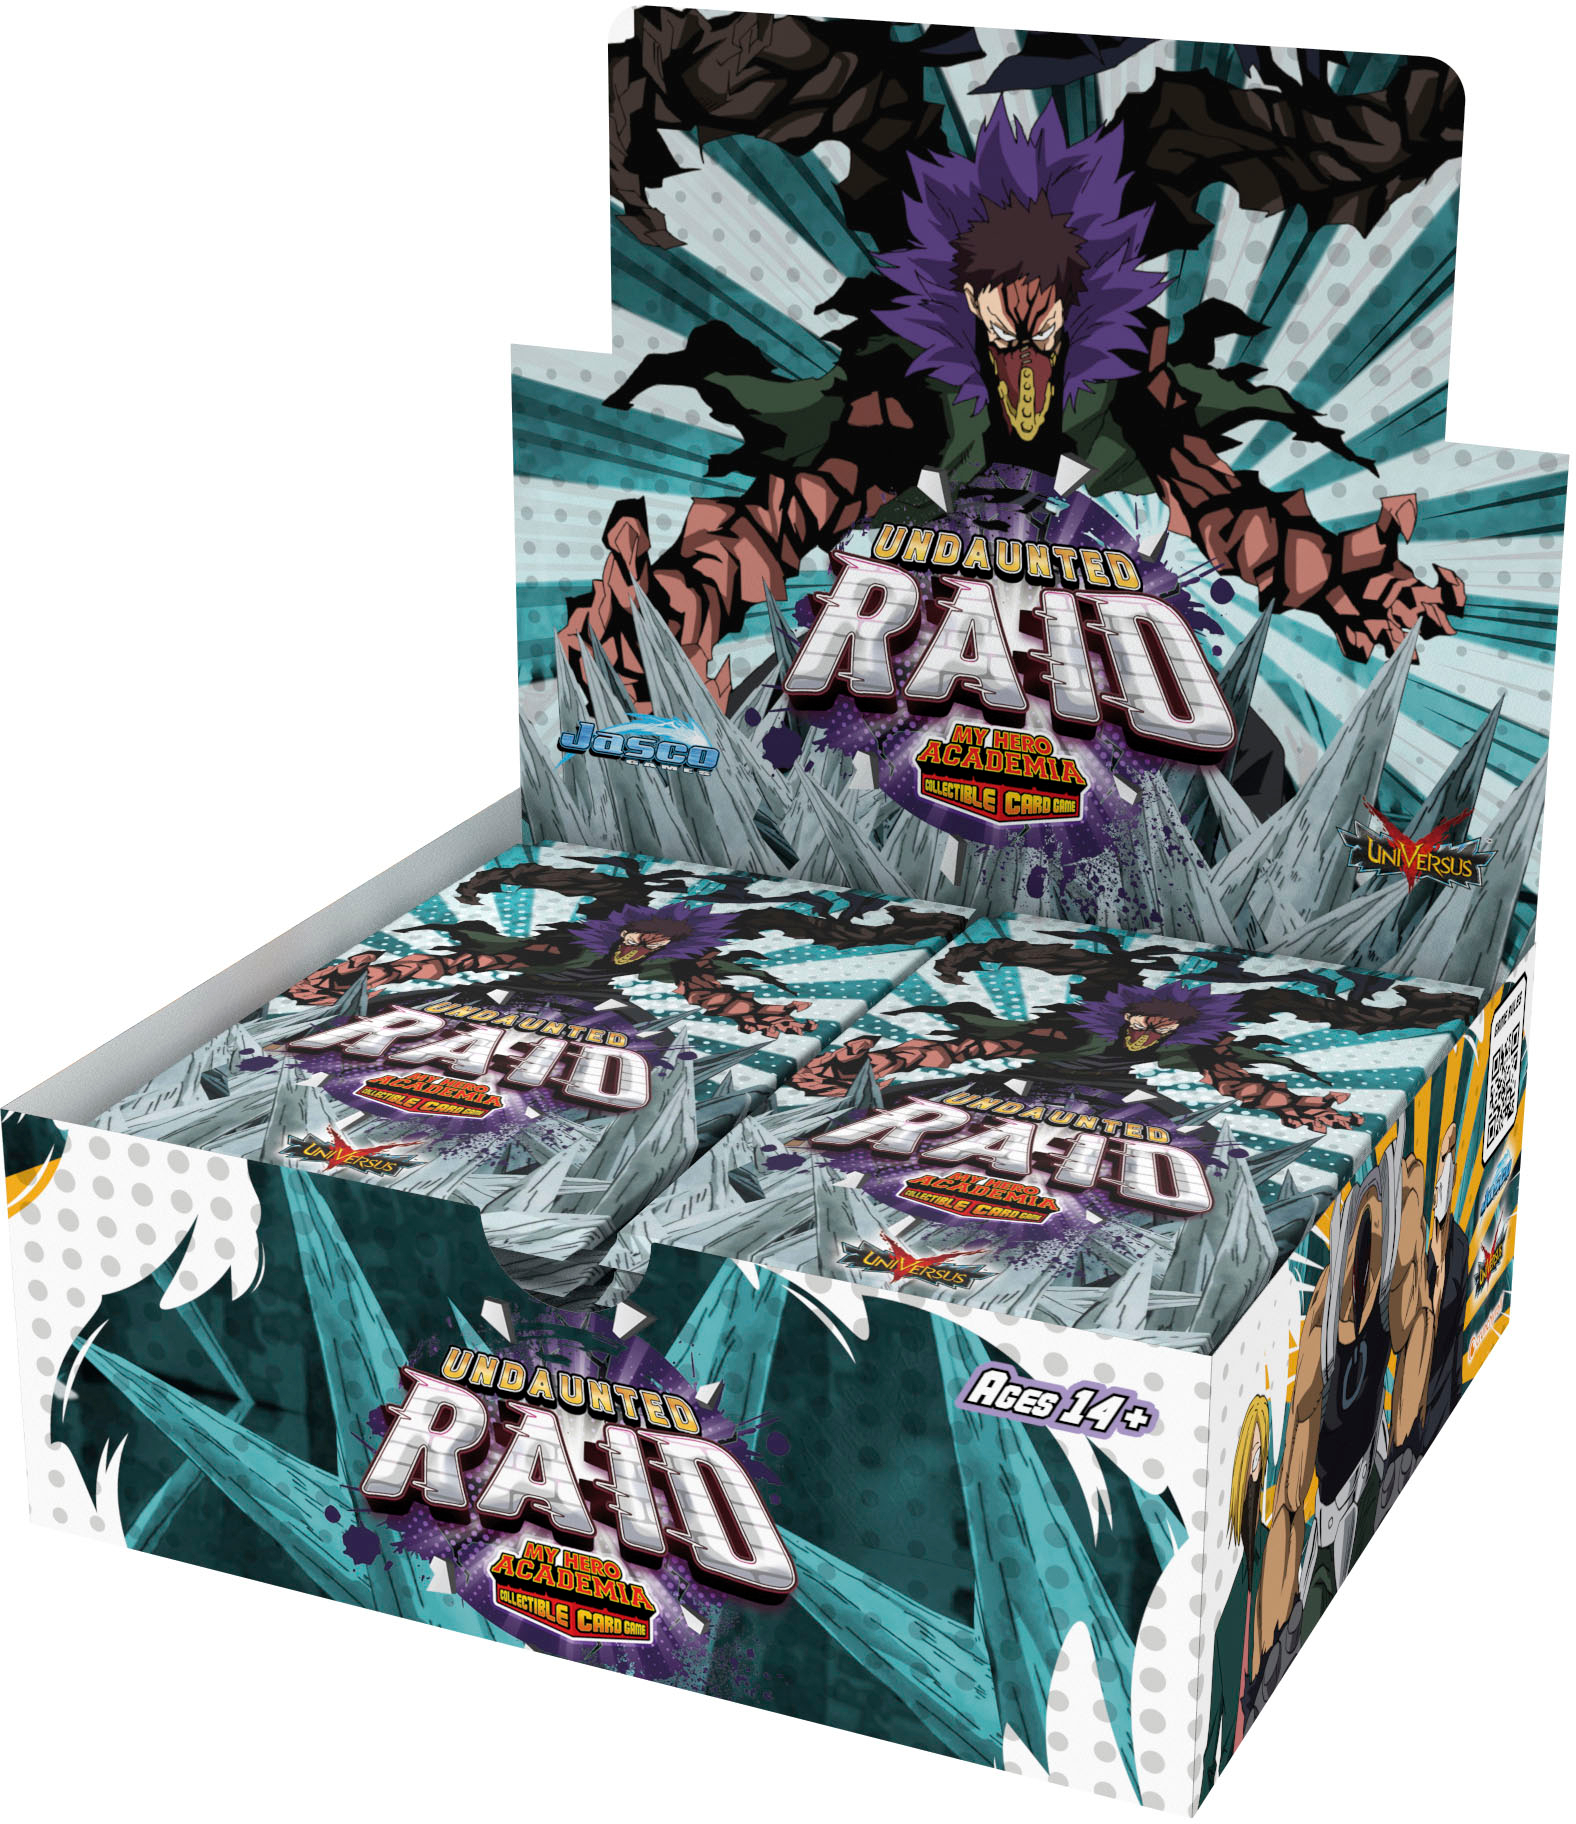 Buy My Hero Academia: The Card Game Online at Low Prices in India